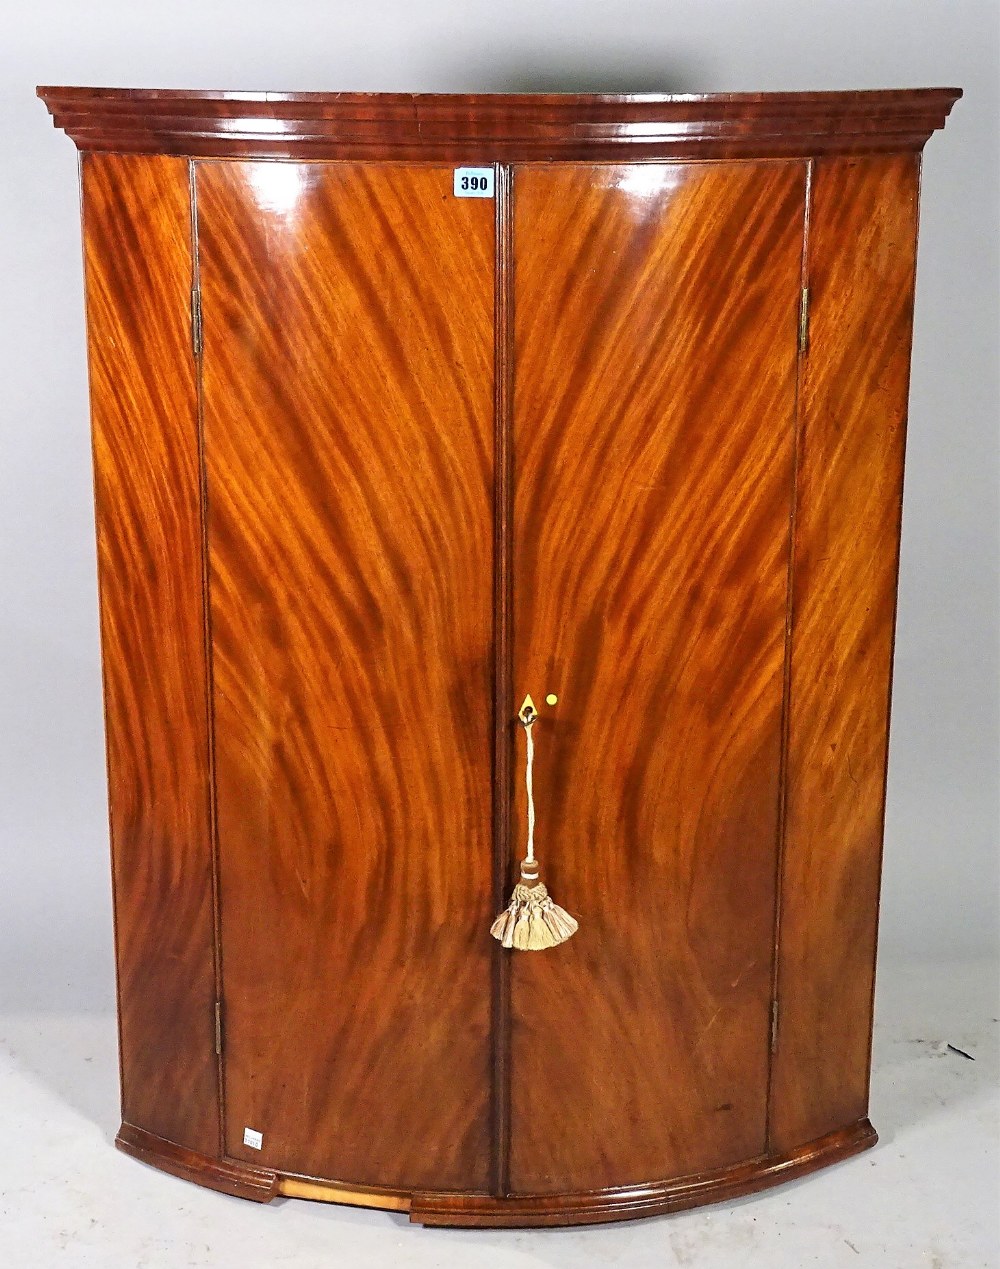 An 18th century mahogany bowfront hanging corner cabinet, 77cm wide x 100cm high.